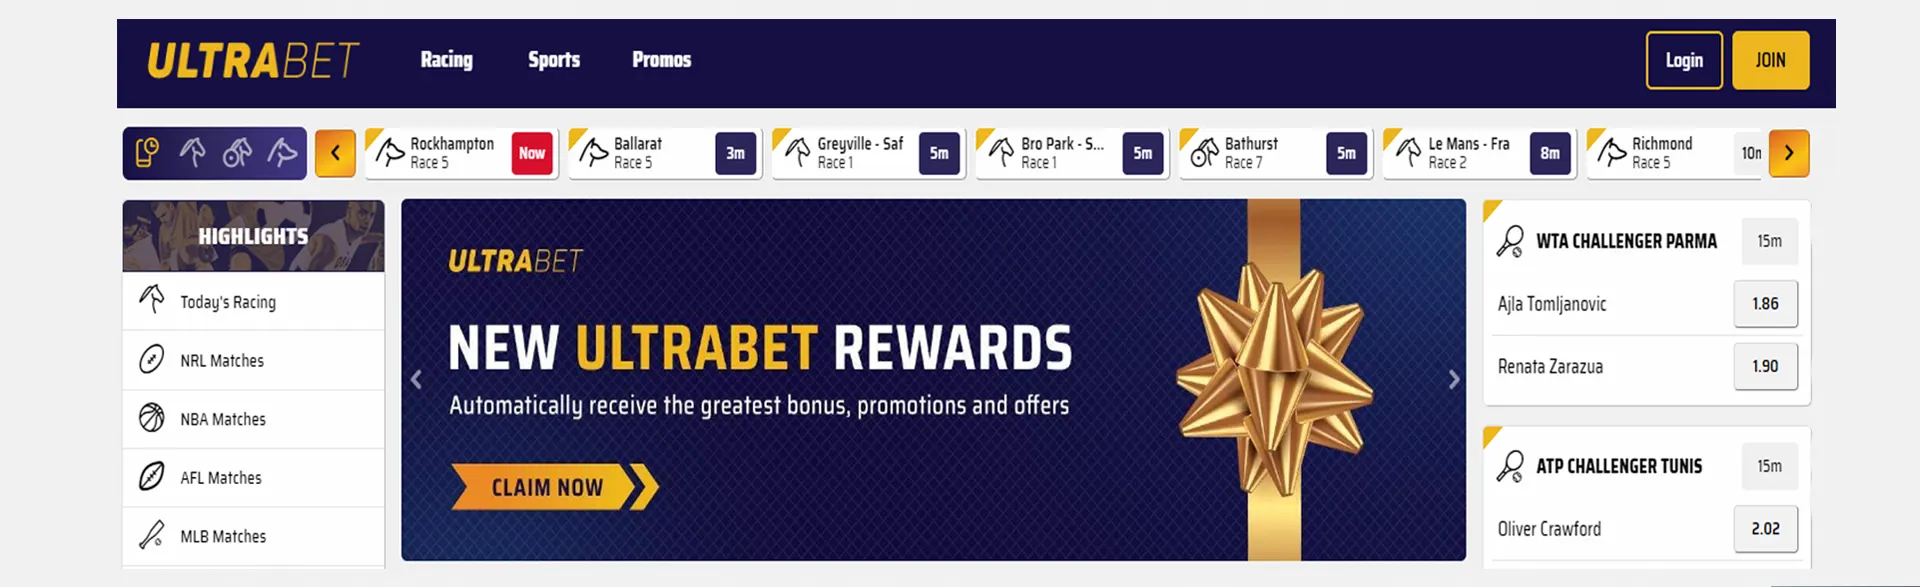 Ultrabet rewards page featuring bonuses, promotions, and upcoming racing events.